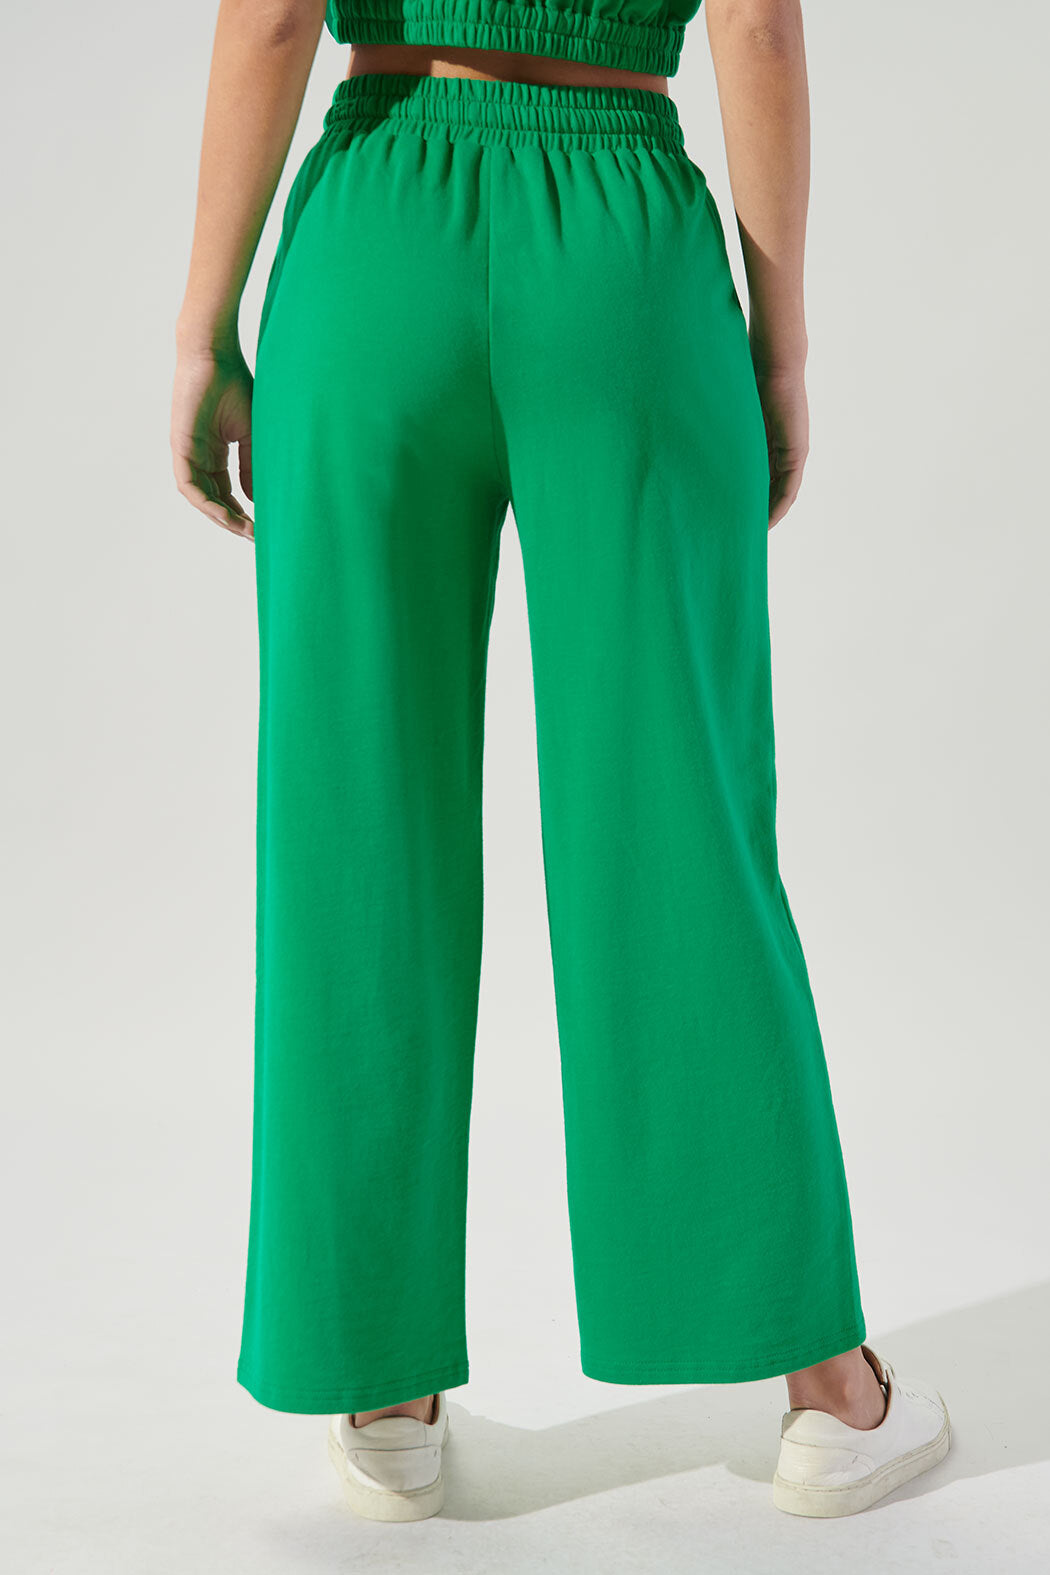 Deanna French Terry Knit Wide Leg Pants